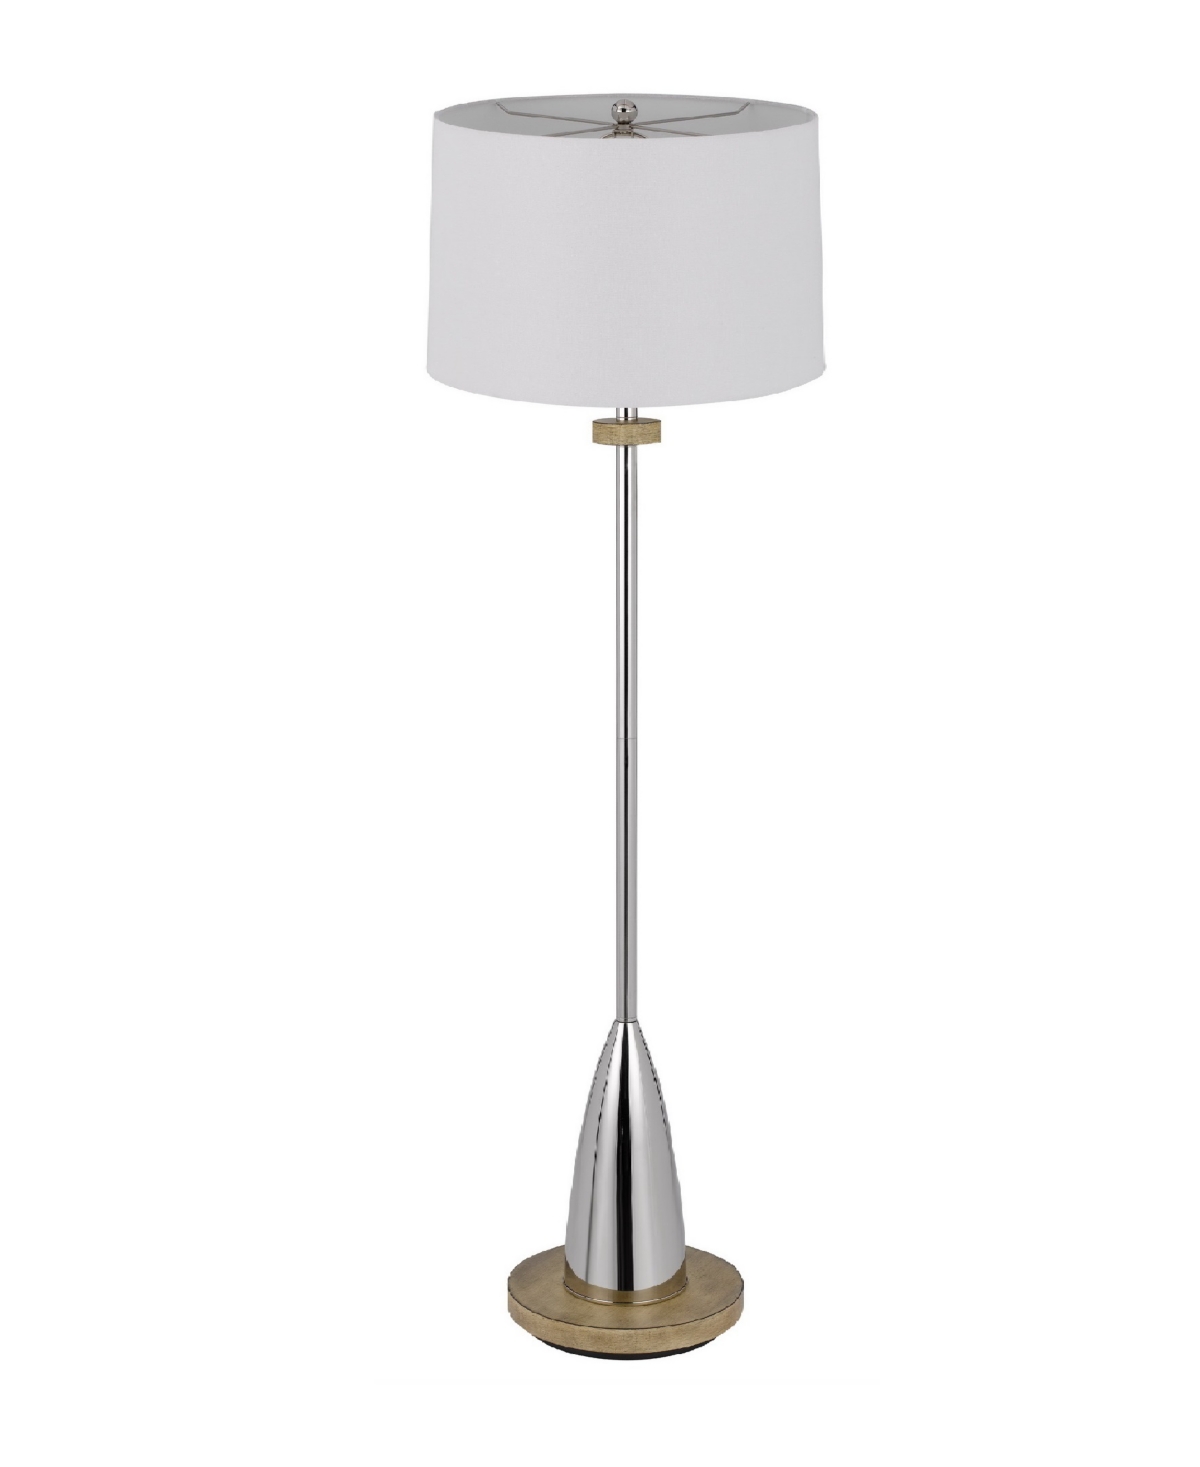 Shop Cal Lighting 61" Height Metal Floor Lamp With Wood Accents In Chrome,wood